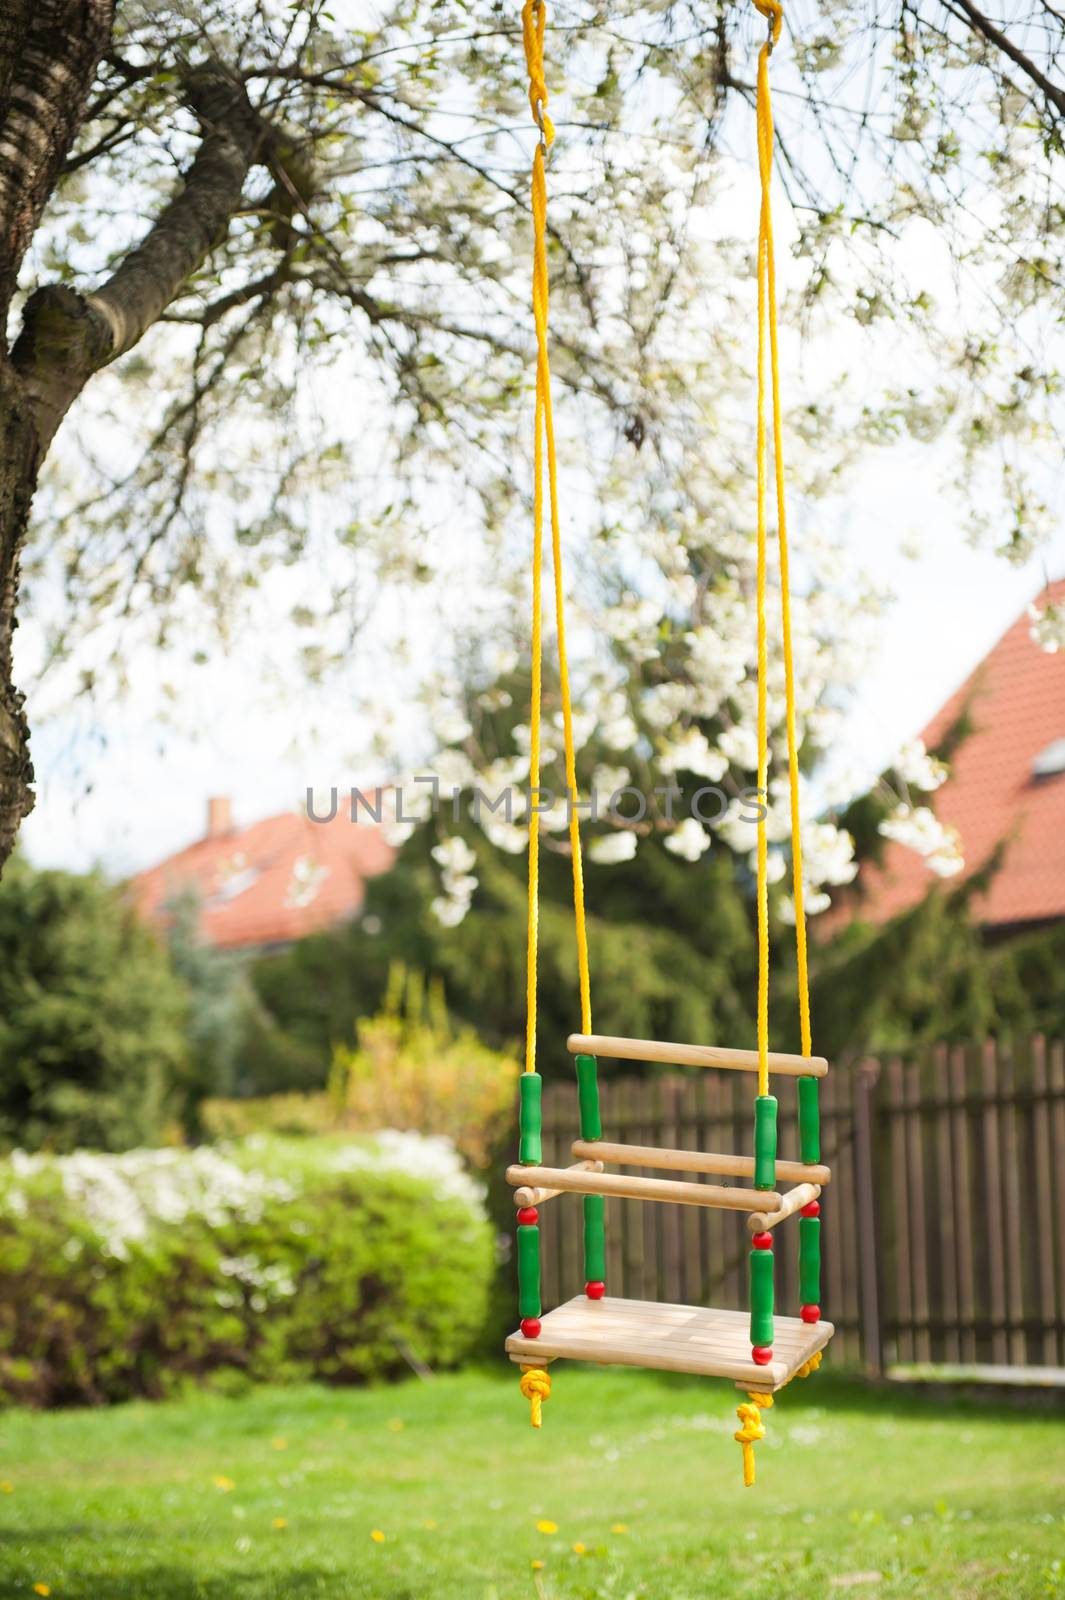 Tree swing for a child hanging on a tree branch